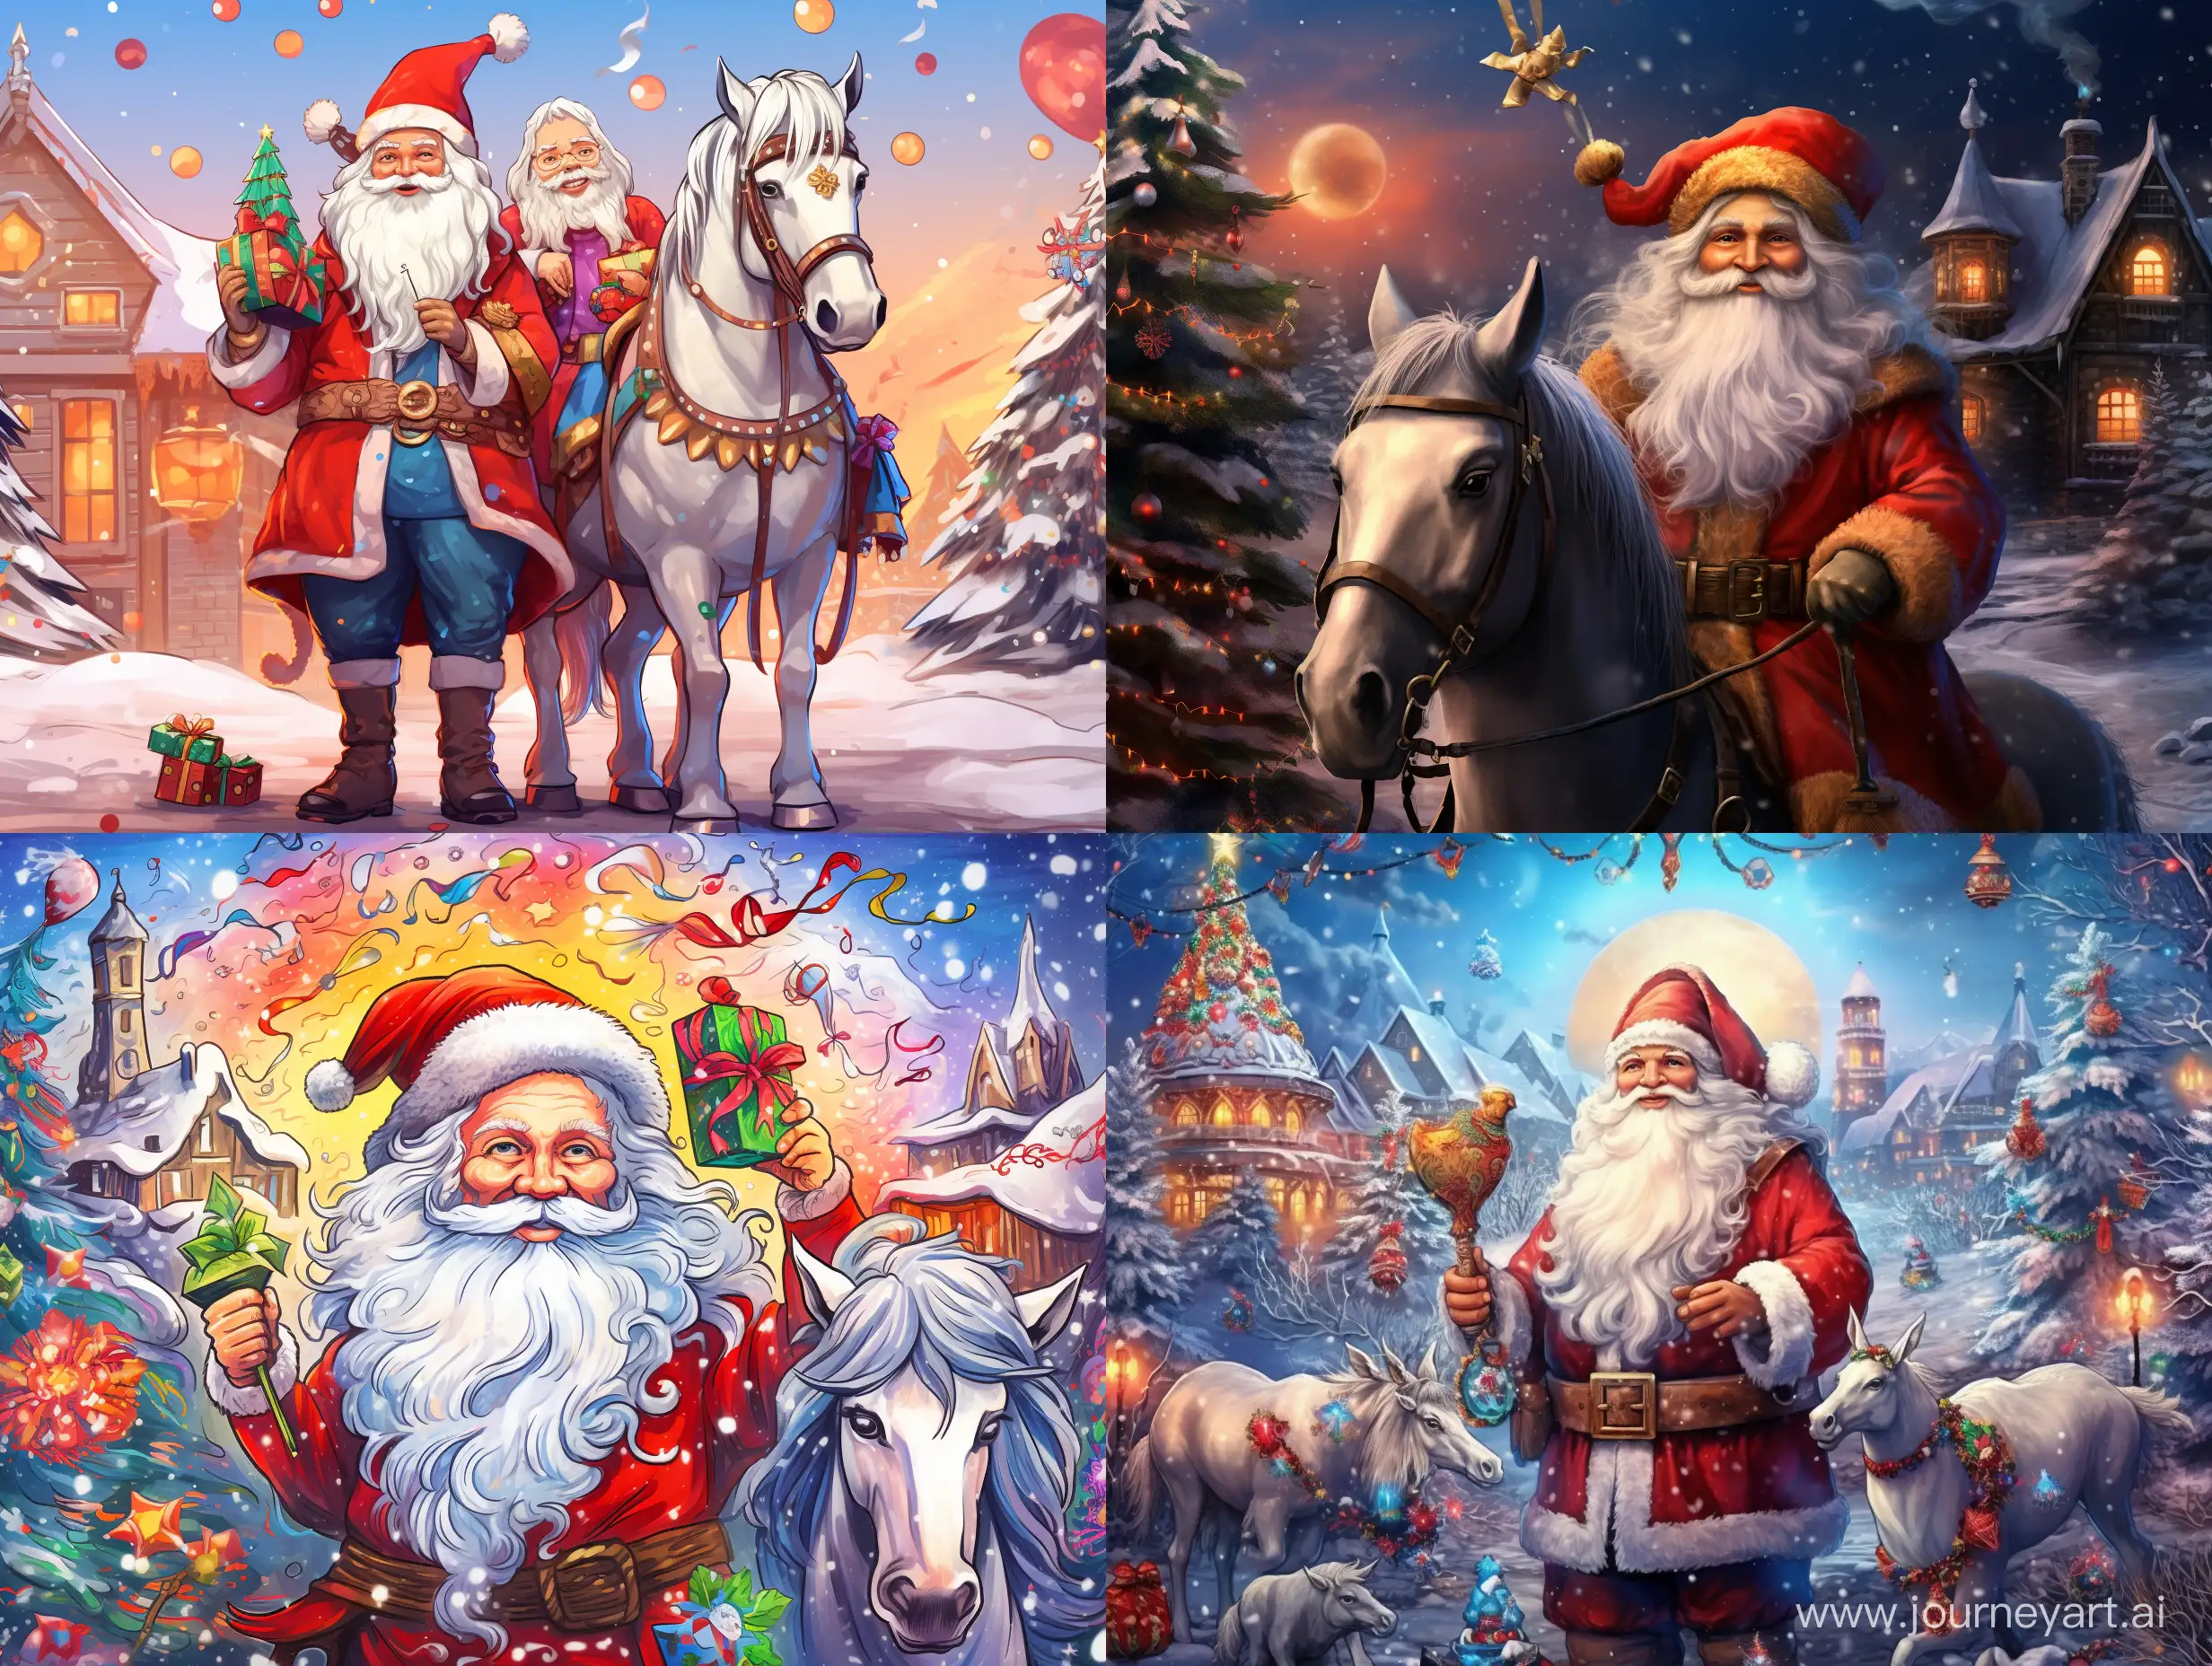 picture for a new year summary video. Put 2 30-years old slim Santa Clauses without mustache and beard. Use other new year symbols, new year tree, stars, magic unicorns.